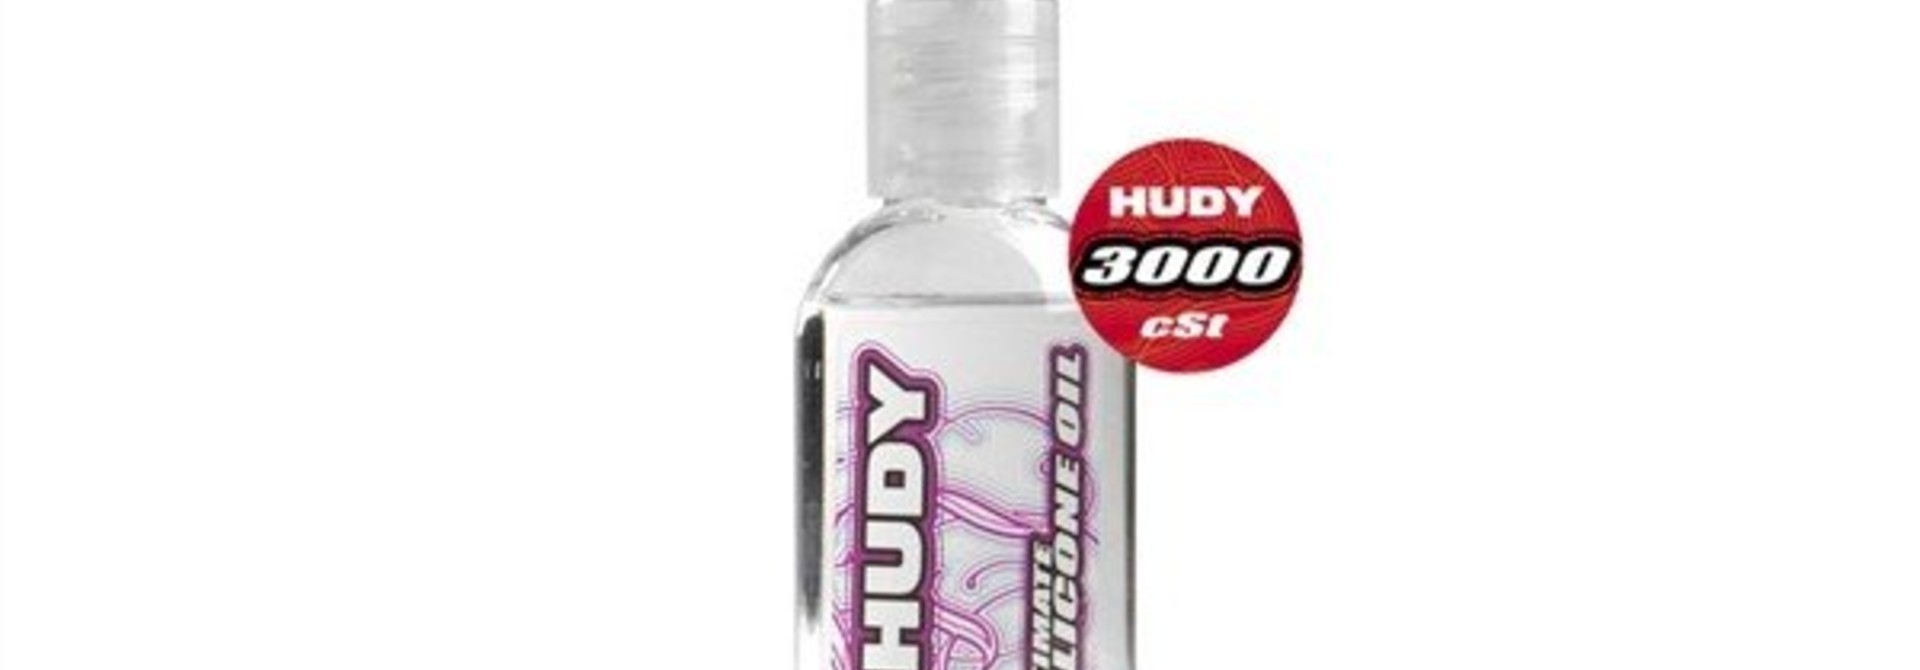 HUDY ULTIMATE SILICONE OIL 3000 cSt - 50ML. H106430